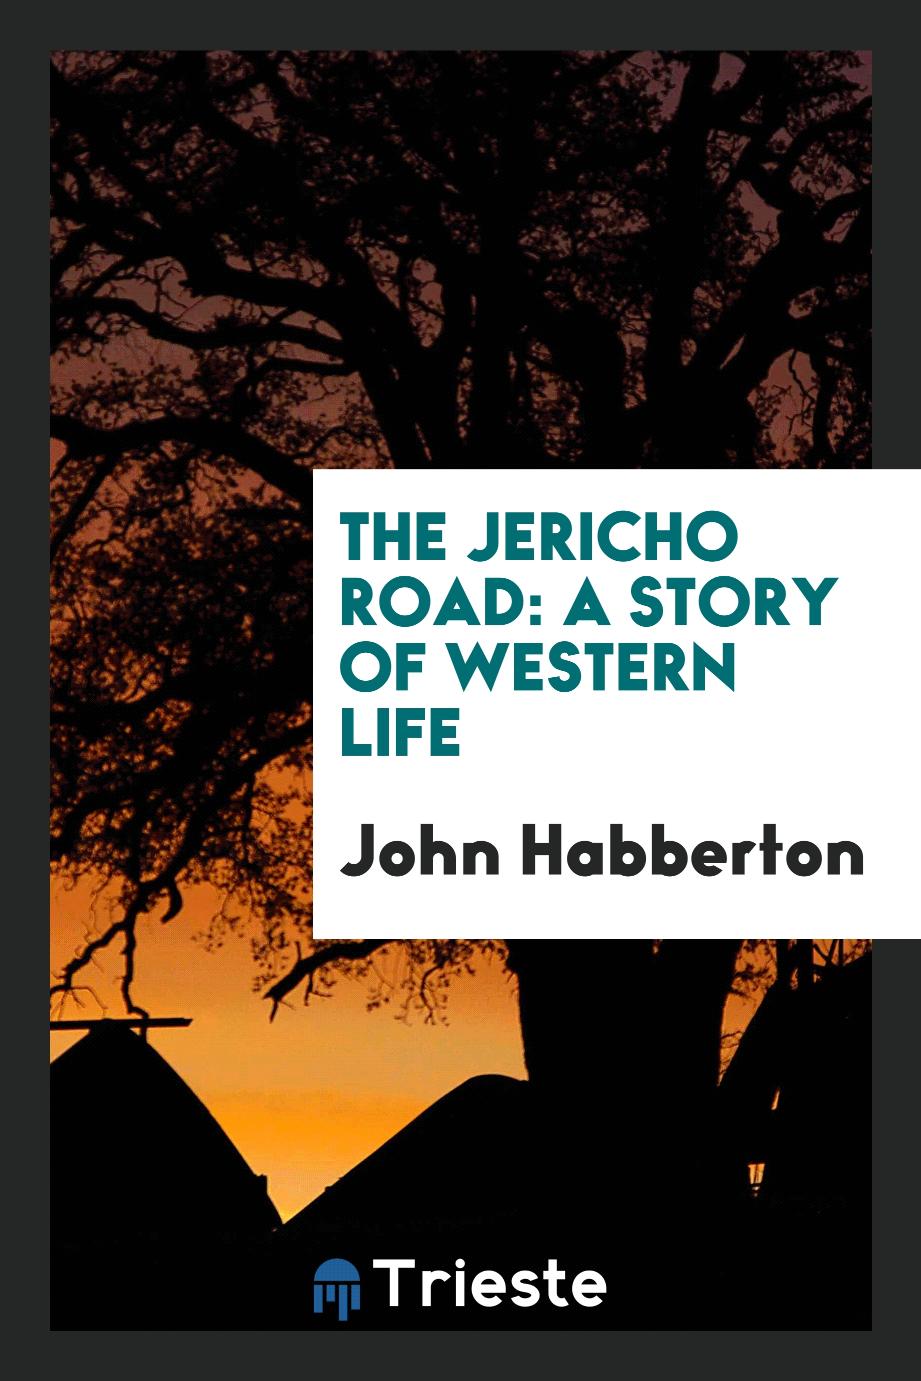 The Jericho Road: a story of western life